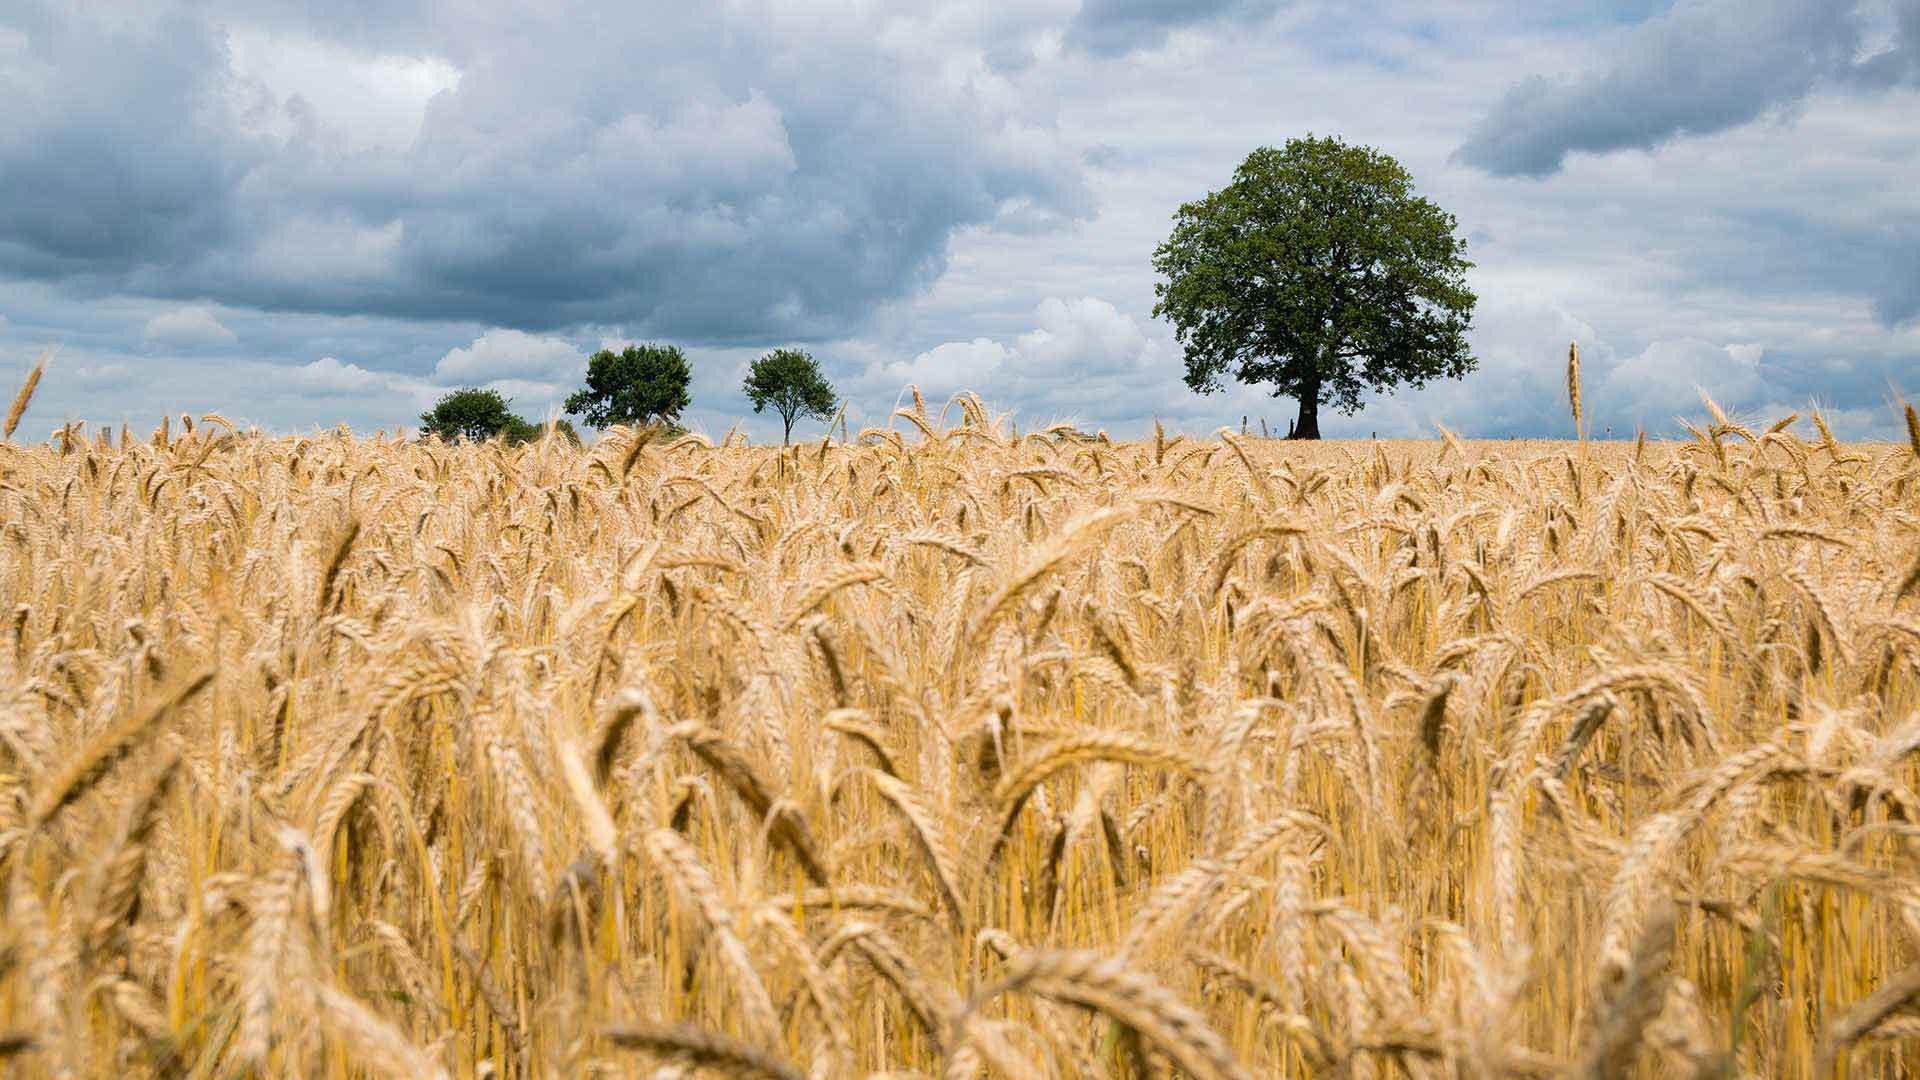 A field of wheat with a few trees, symbolizing the fertilizer shortage